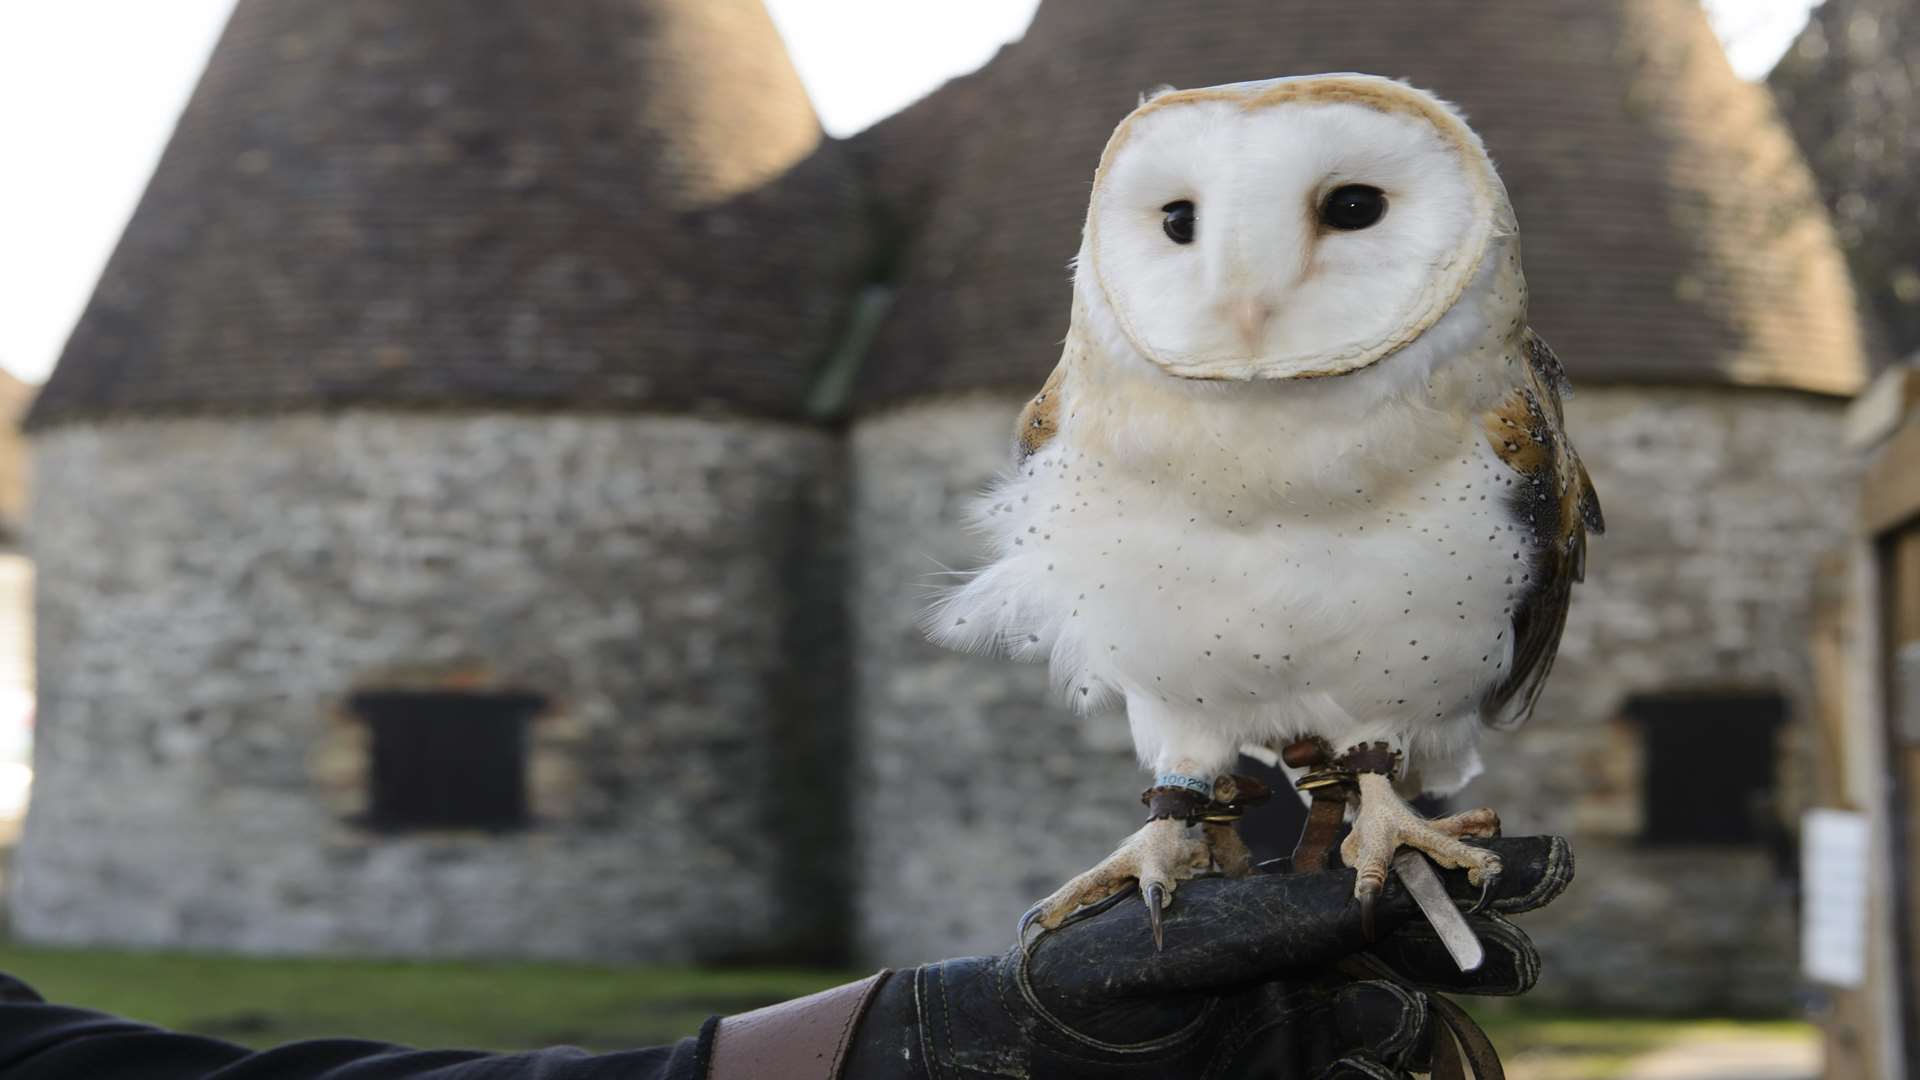 Kent Owl Academy, based at Kent Life, says owls are increasingly being requested at funerals